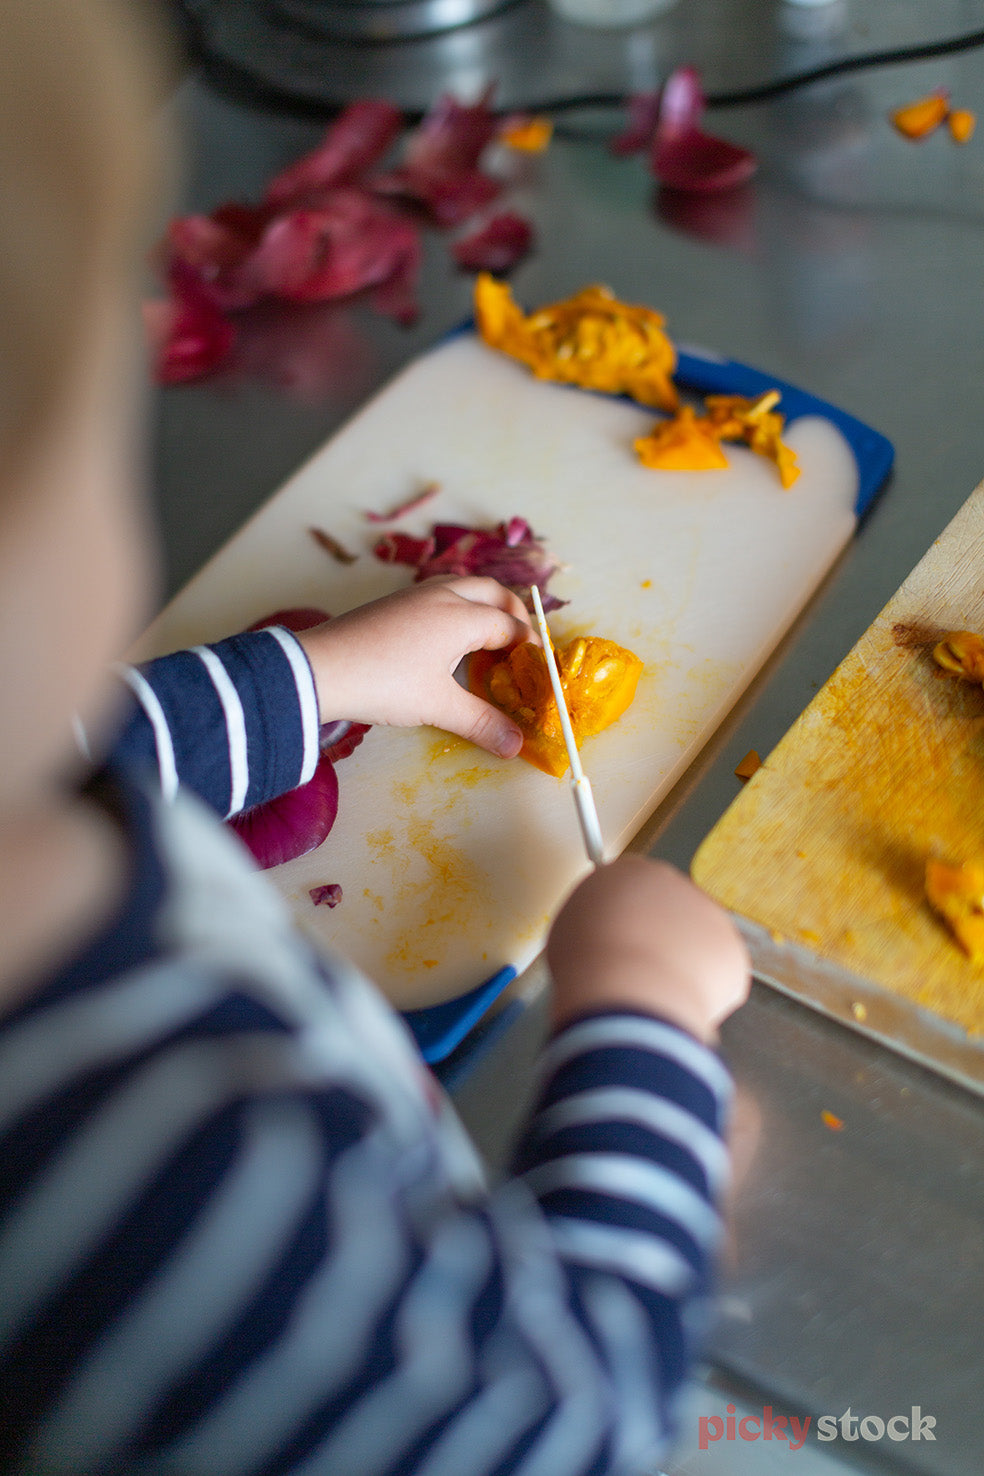 Over the shoulder shot of a child play cooking with plastic knife cutting pumpkin and red onion. 